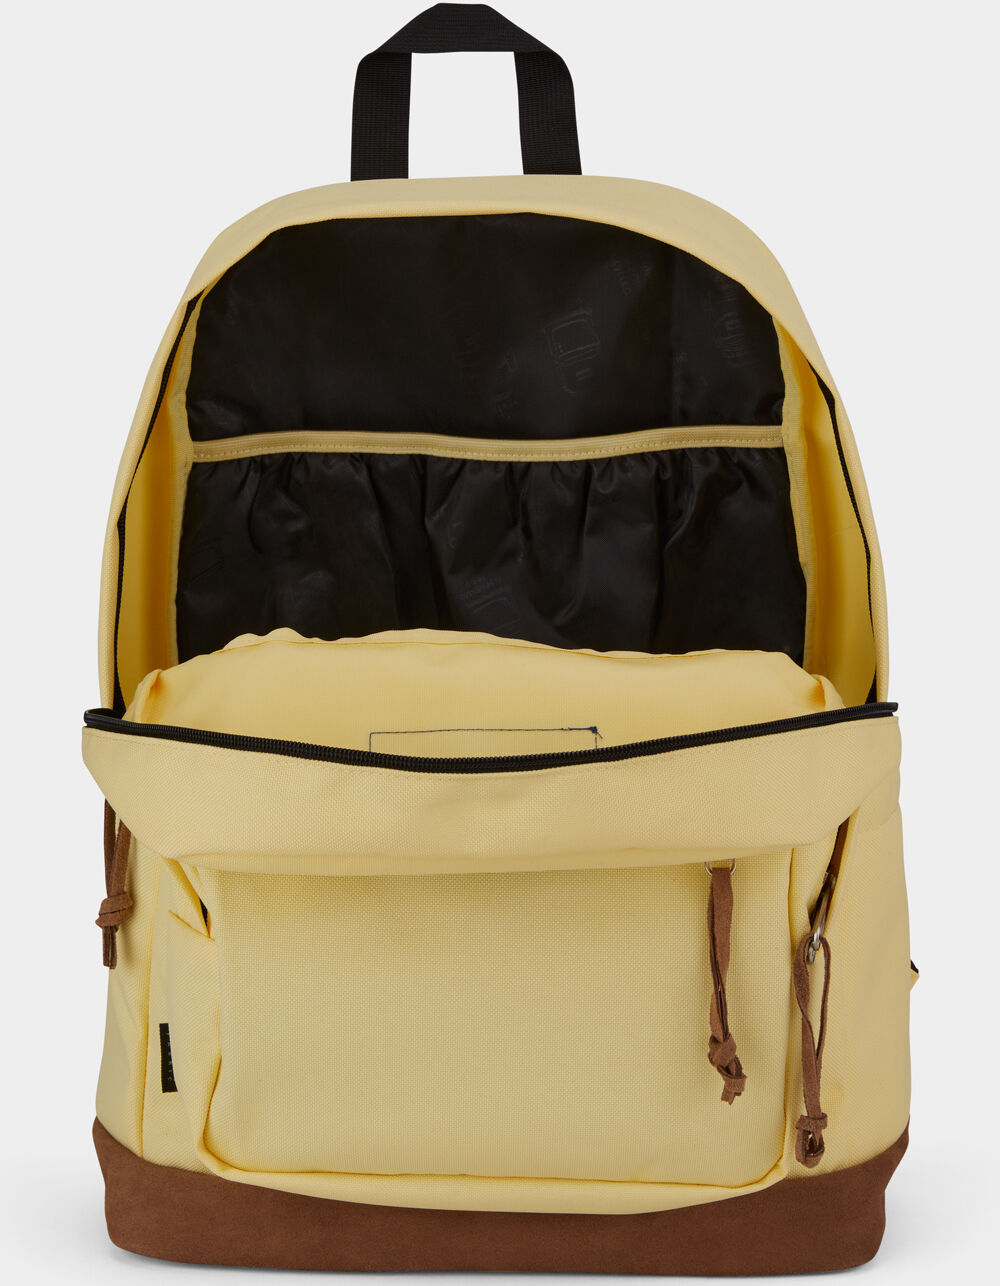 JANSPORT Right Pack Yellow Maize Backpack